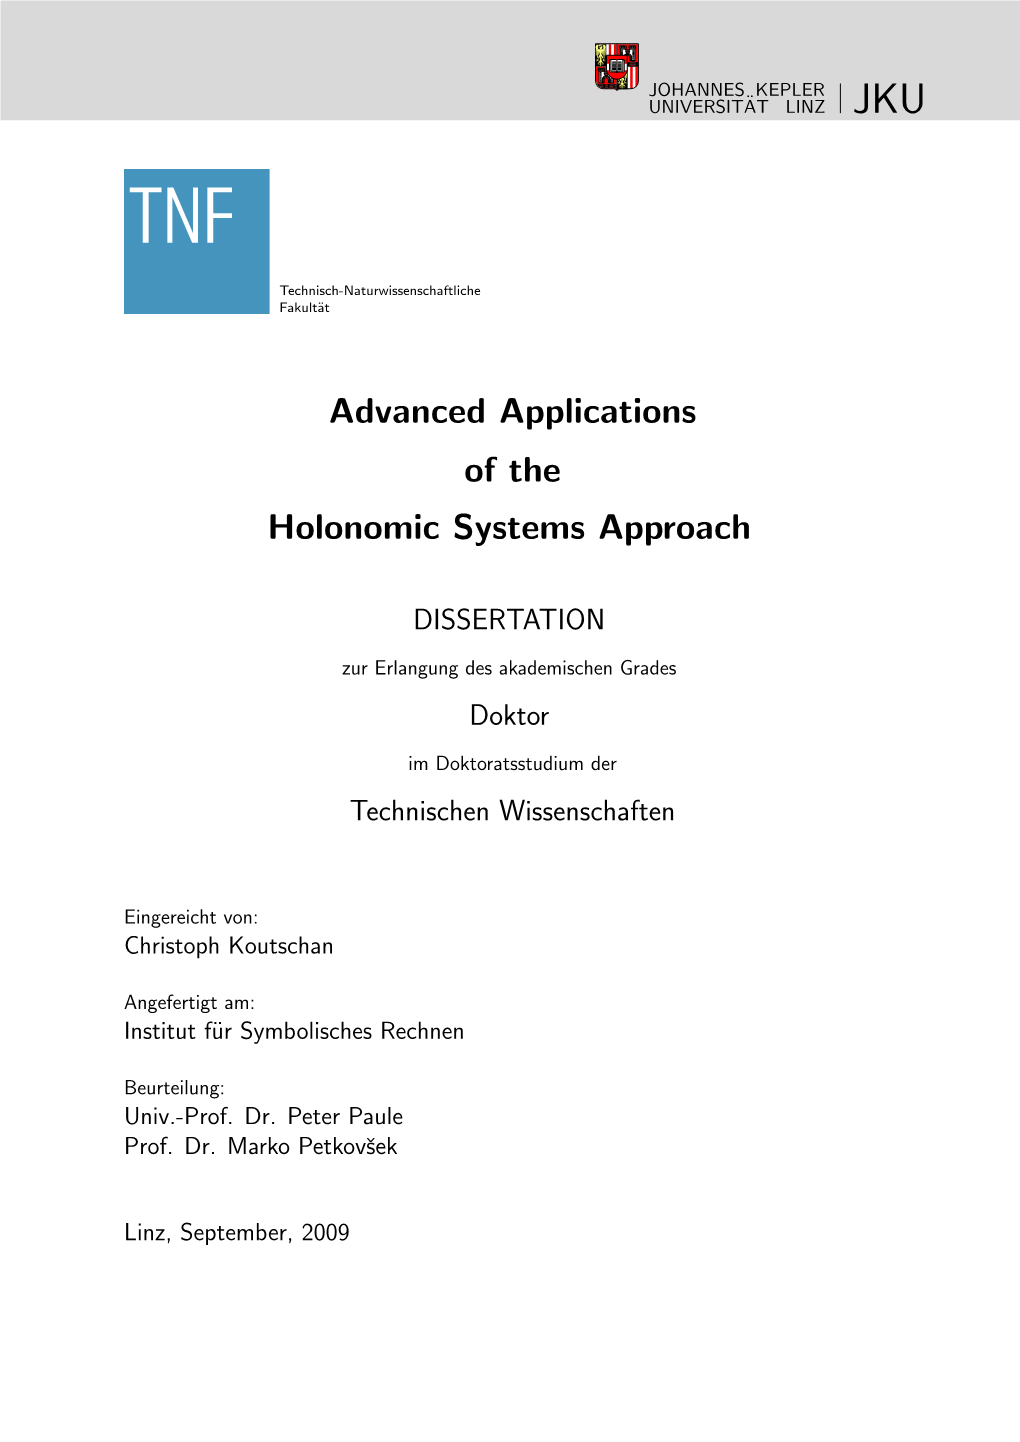 Advanced Applications of the Holonomic Systems Approach